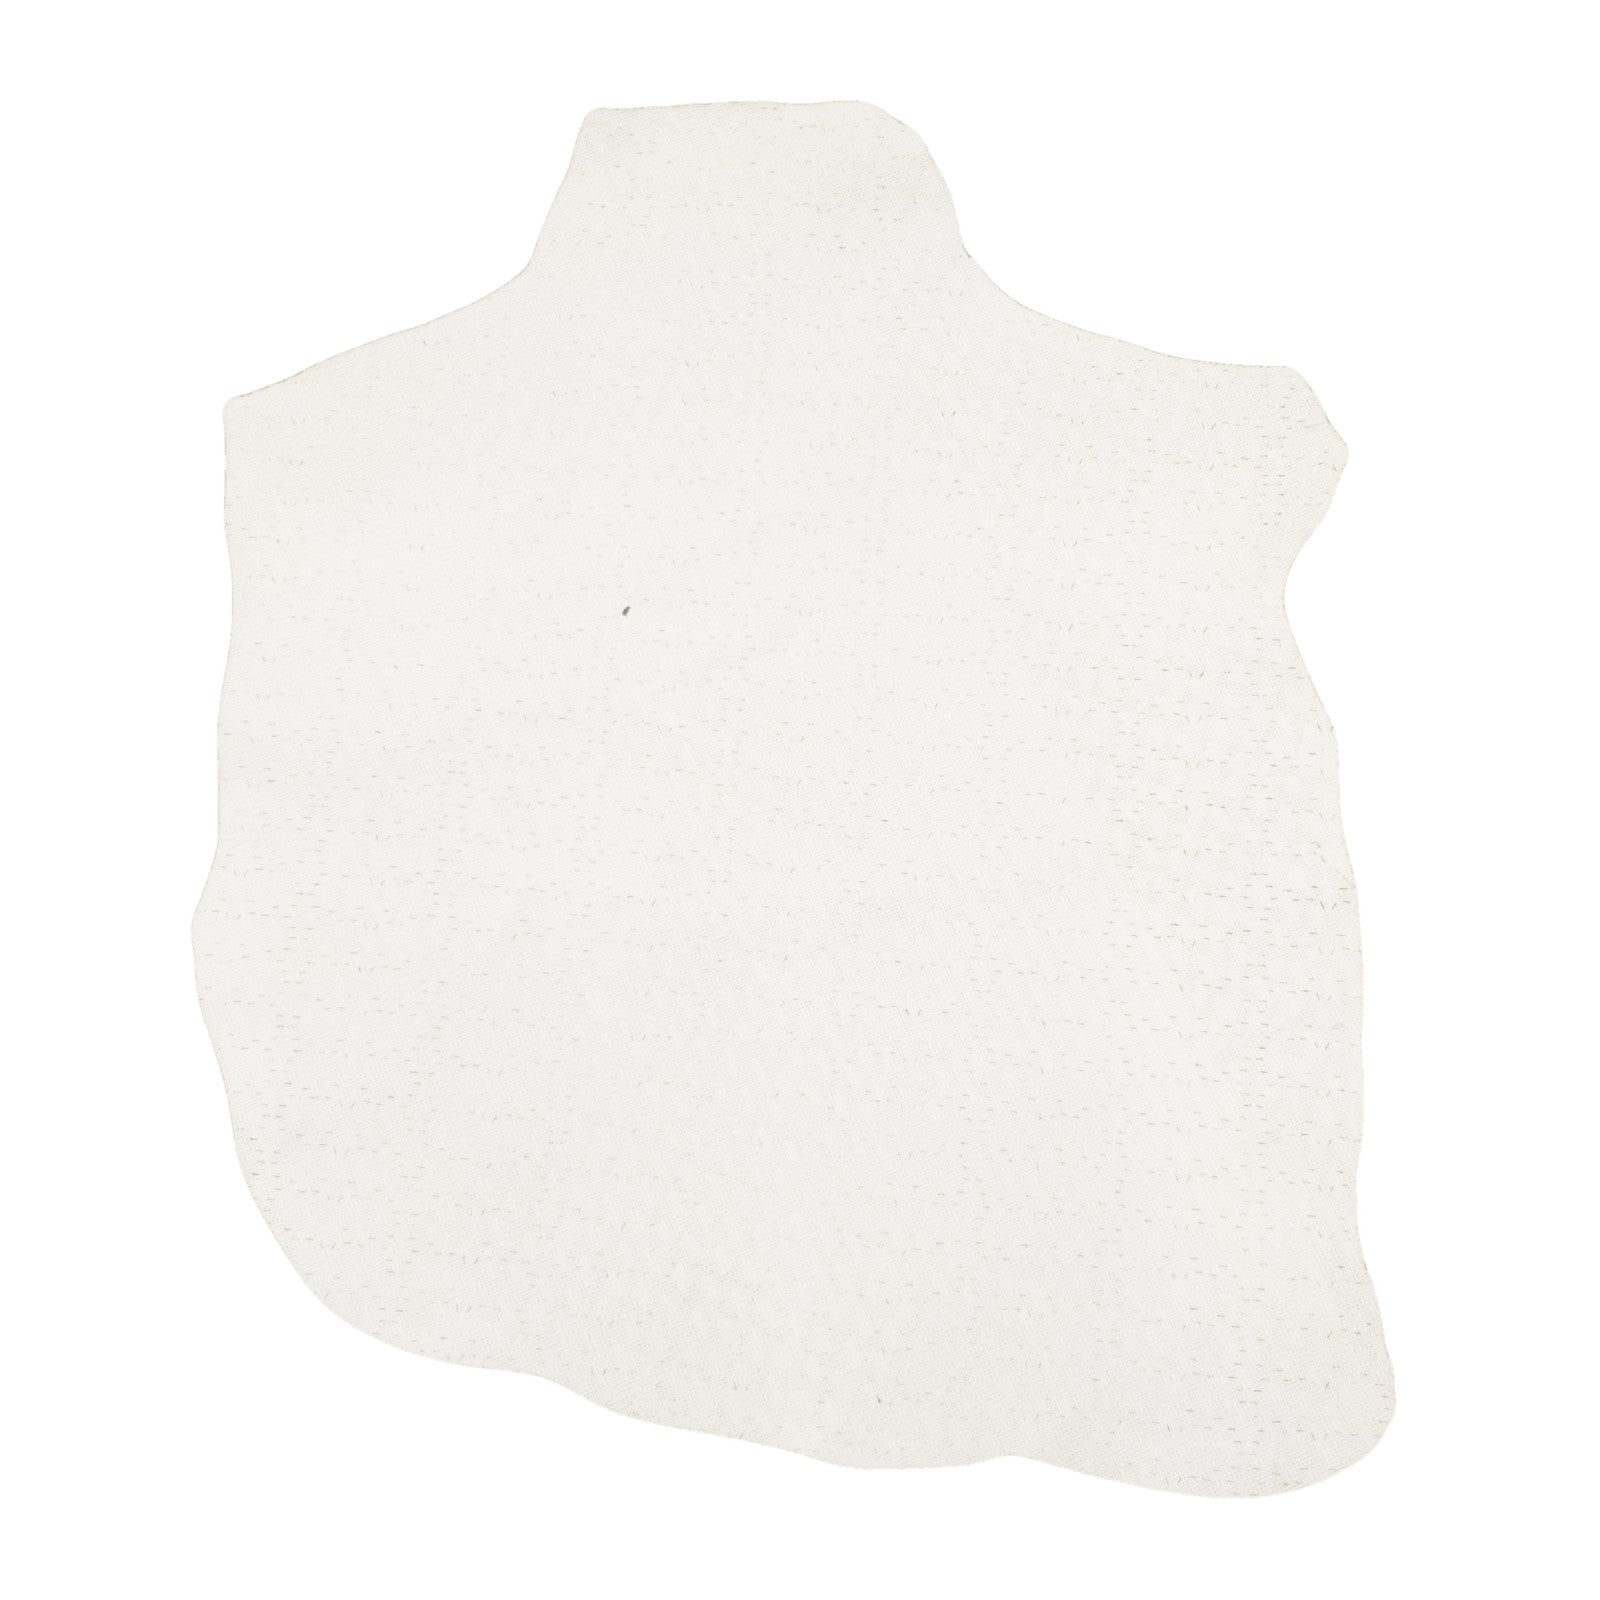 Whicker Off White, 4-5 Sq Ft, 1.5-2.5 oz Goatskin Hides,  | The Leather Guy